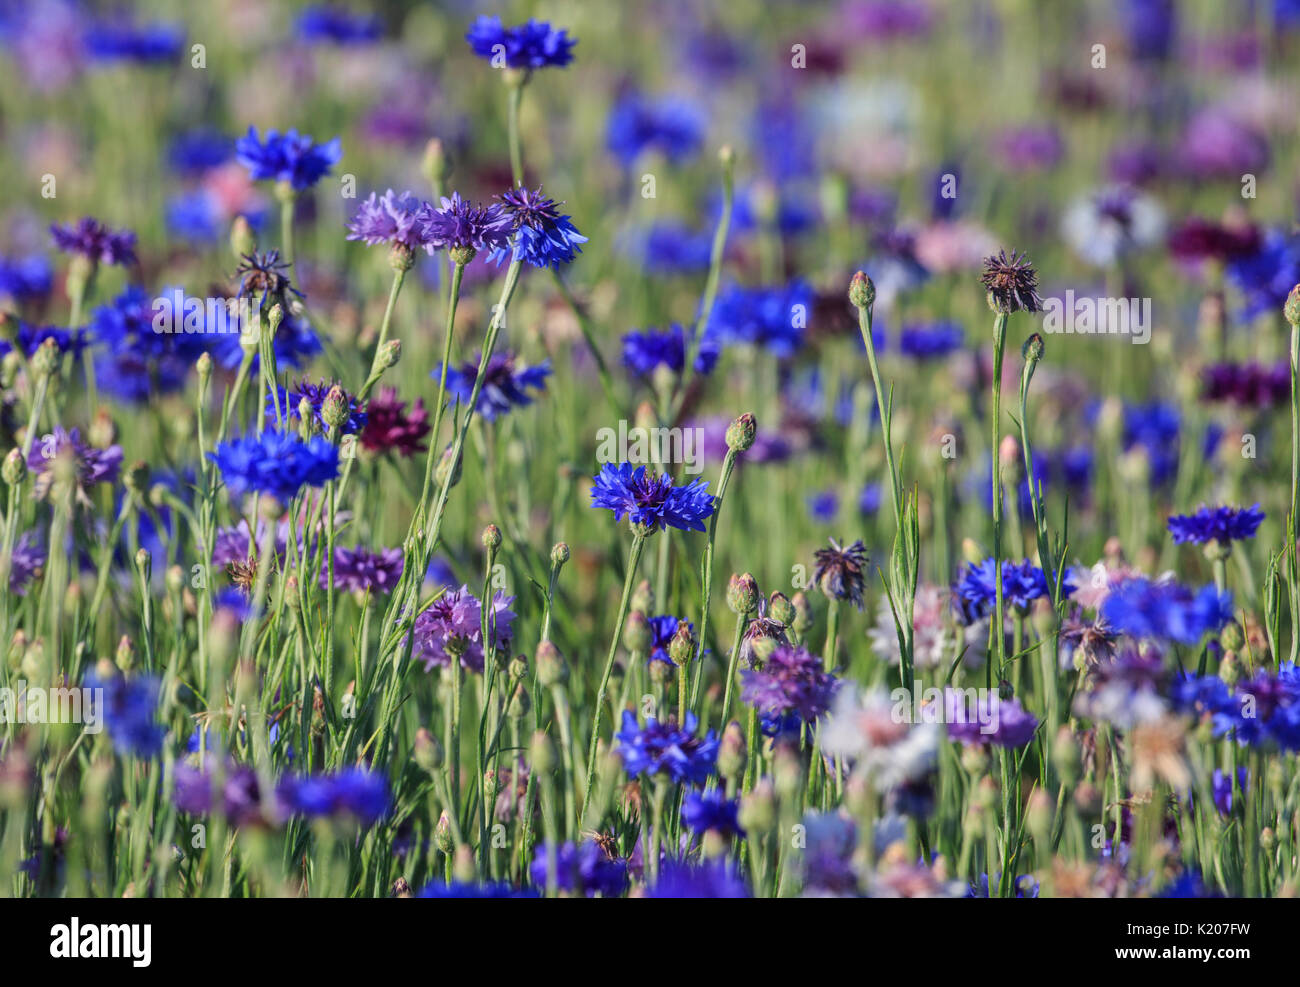 Blue bachelor button flowers in a field Stock Photo